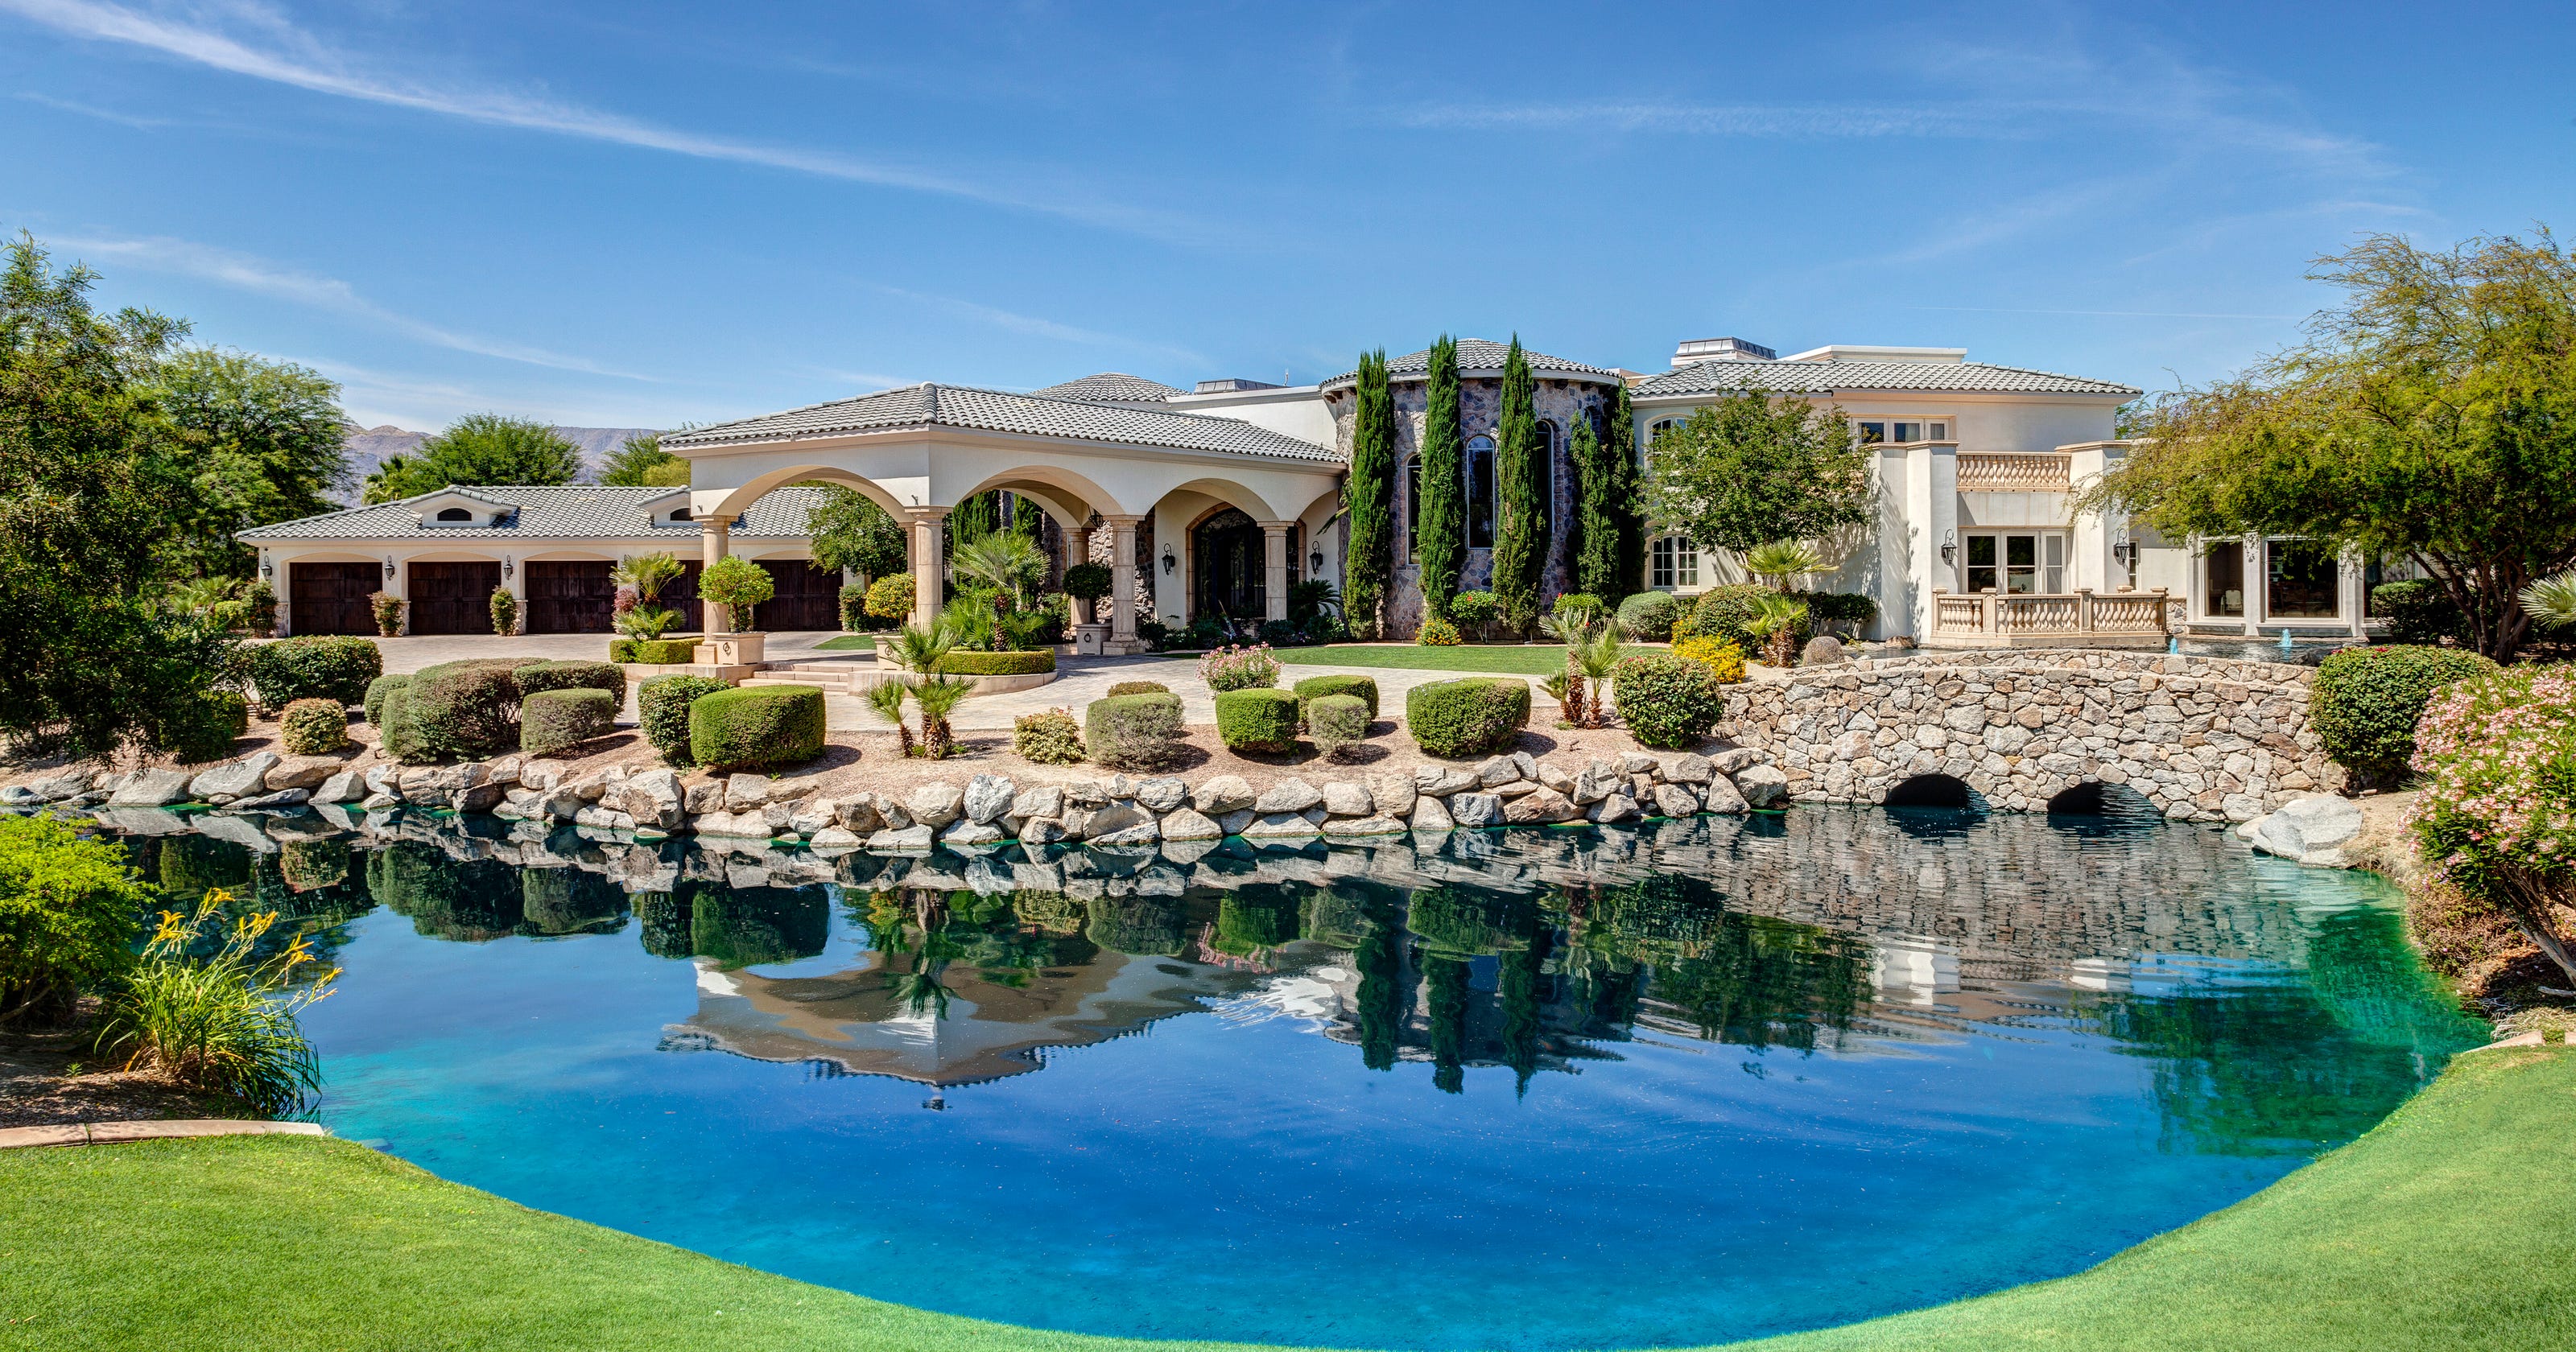 coco-crisp-selling-rancho-mirage-mansion-for-9-995m